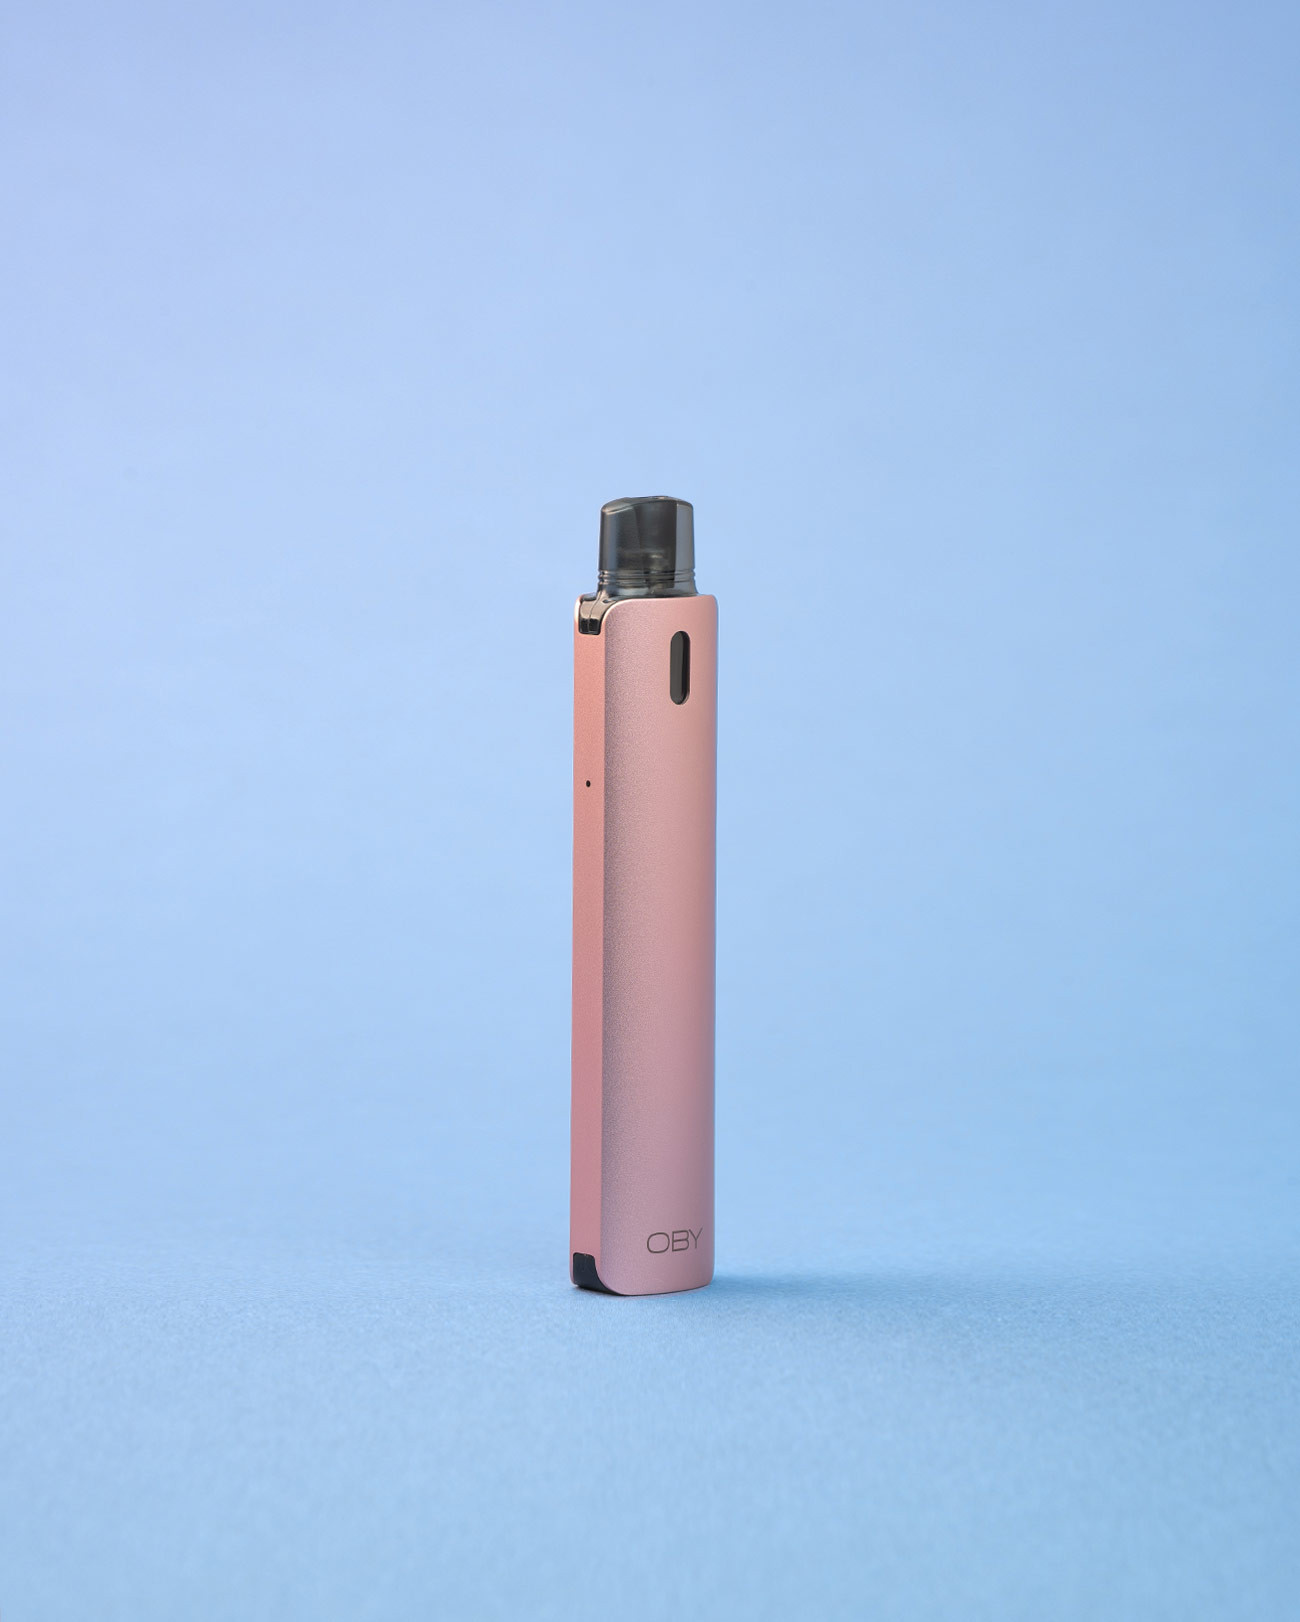 Kit pod Aspire Oby couleur Rose Gold